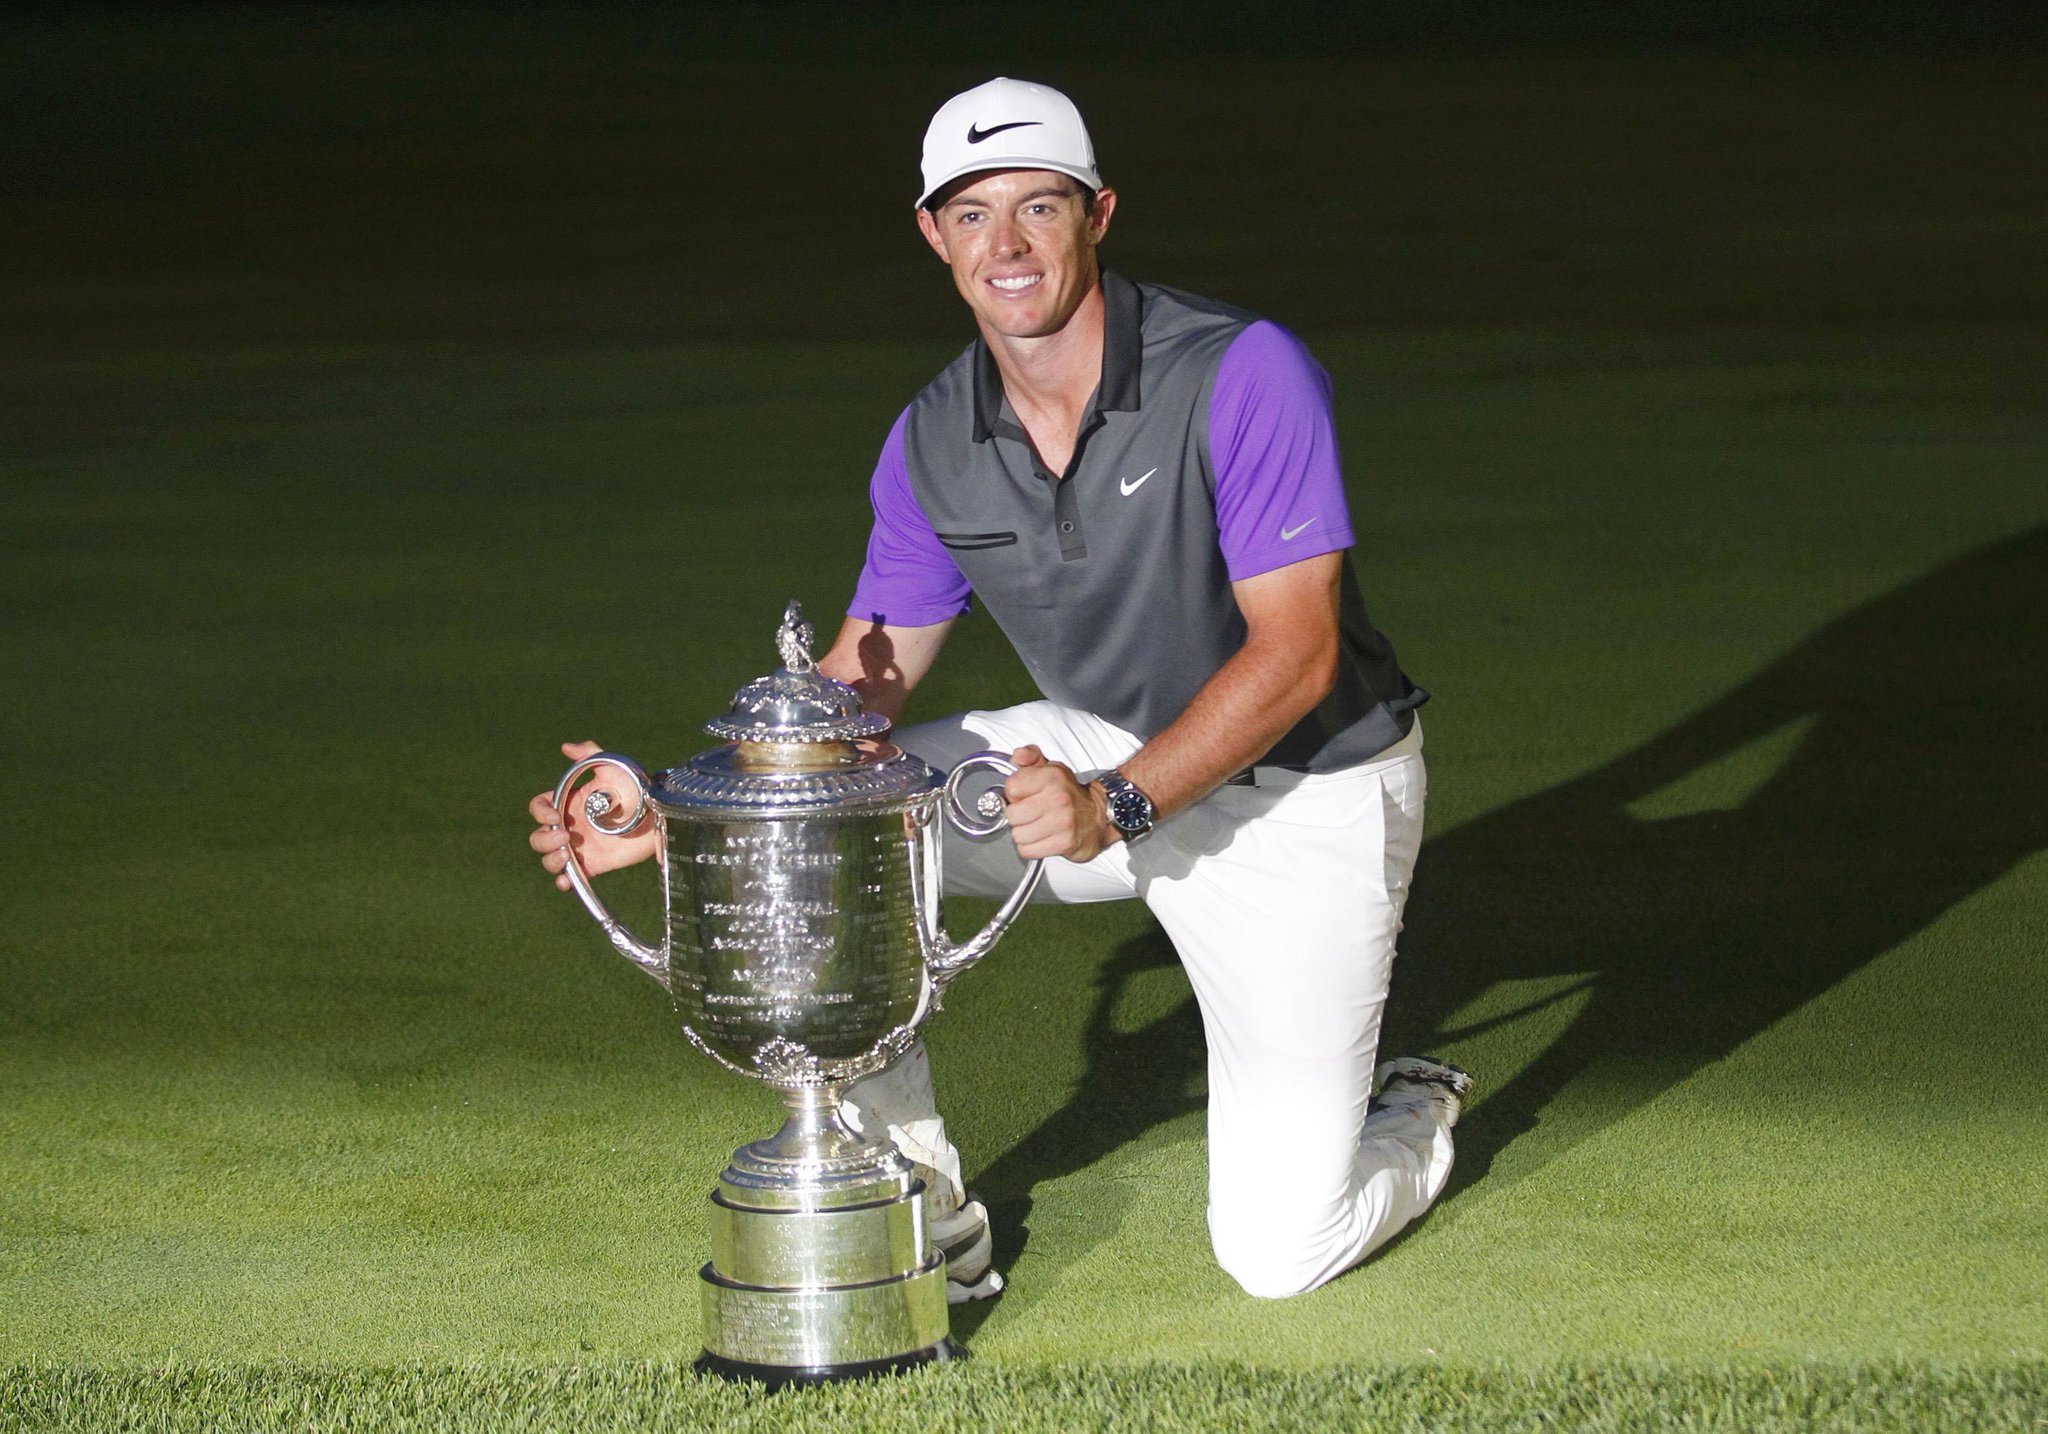 Happy 26th birthday to two-time PGA Championship winner Rory McIlroy! 